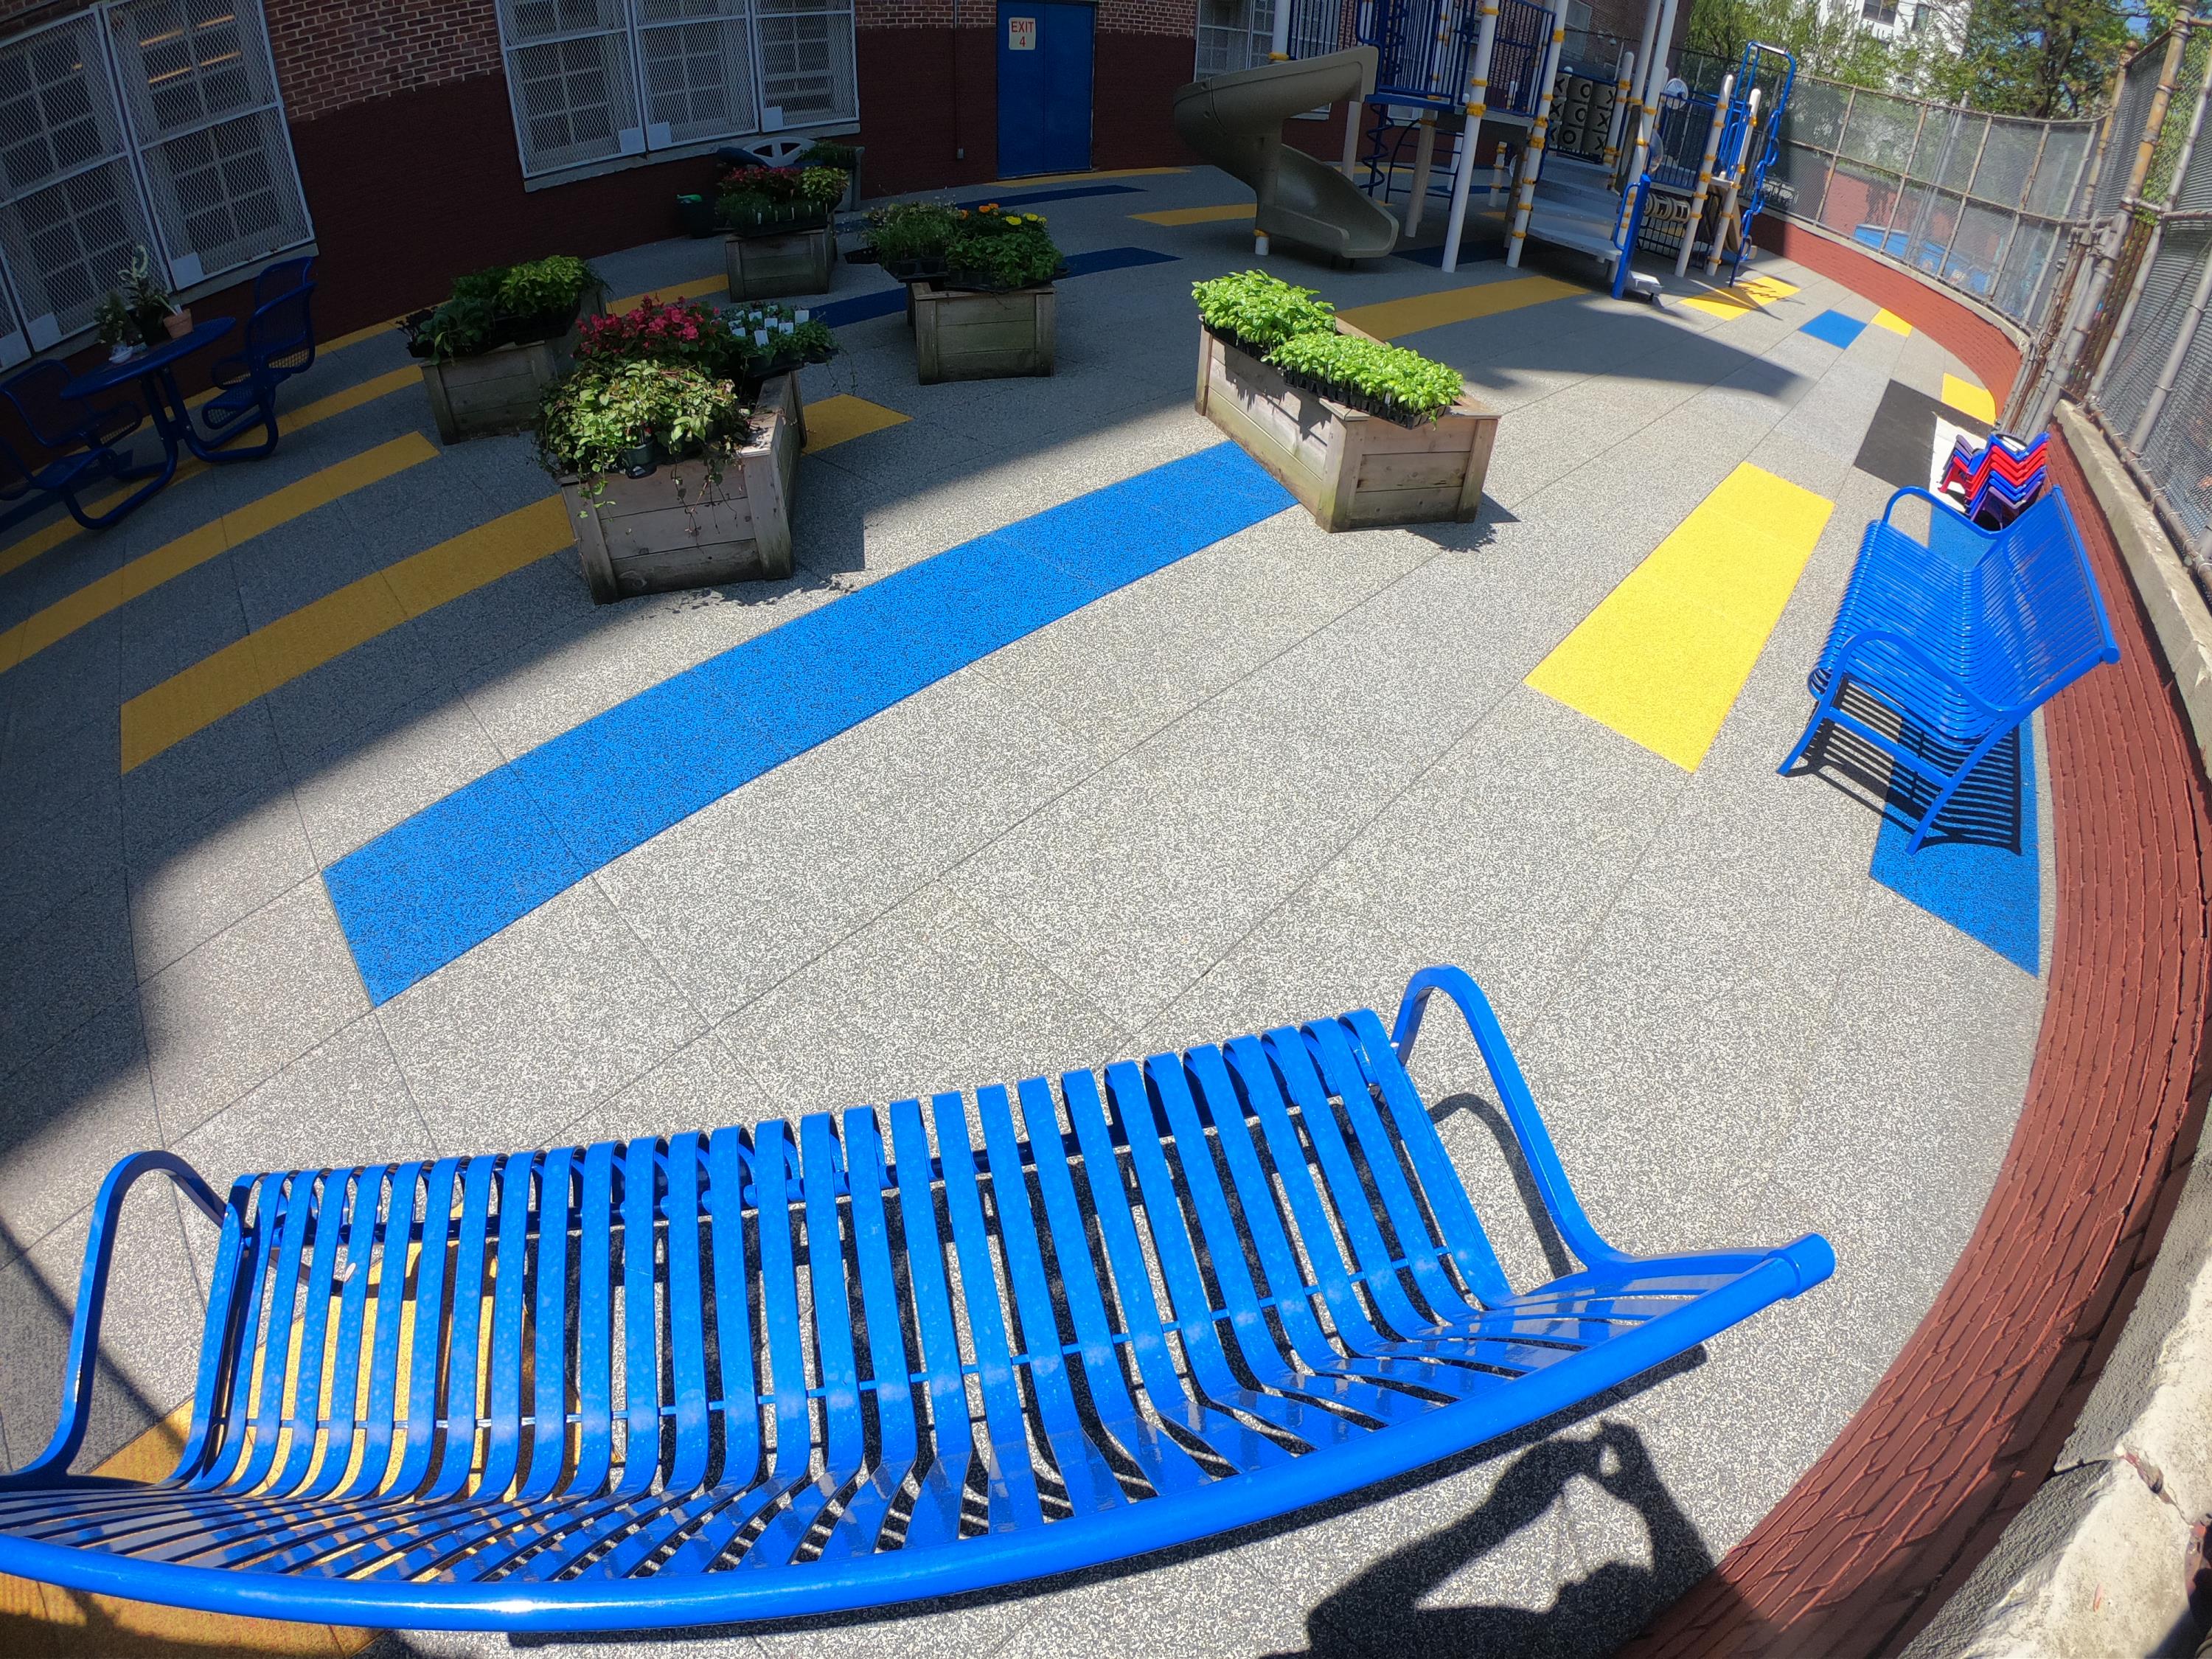 UNITY Surfacing at School Playground Showing Tile Layout